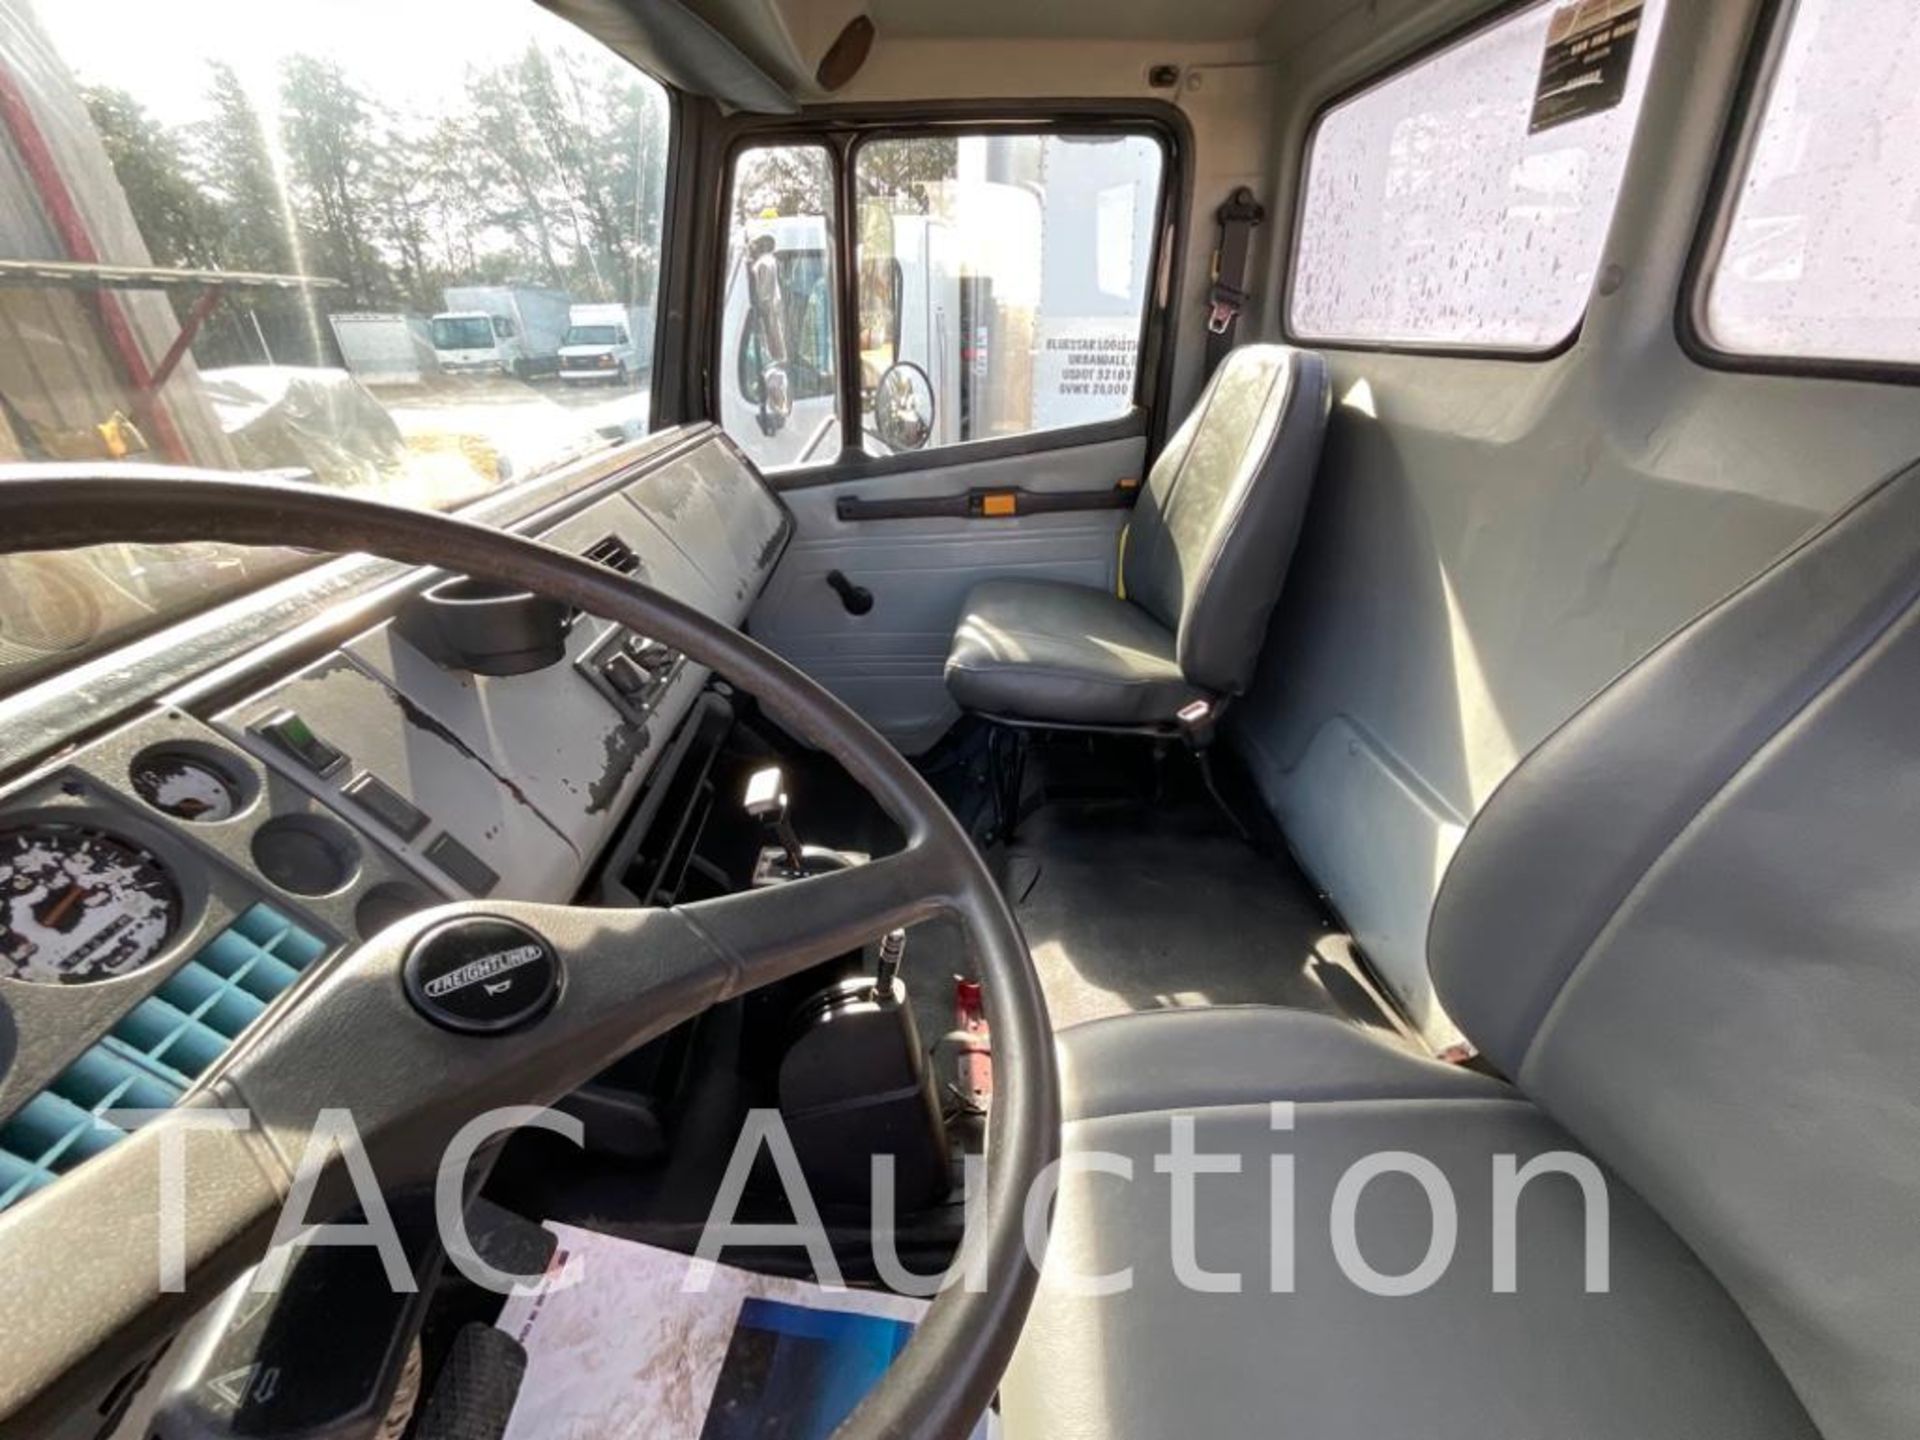 1997 Freightliner FL60 Cab Chassis - Image 15 of 46